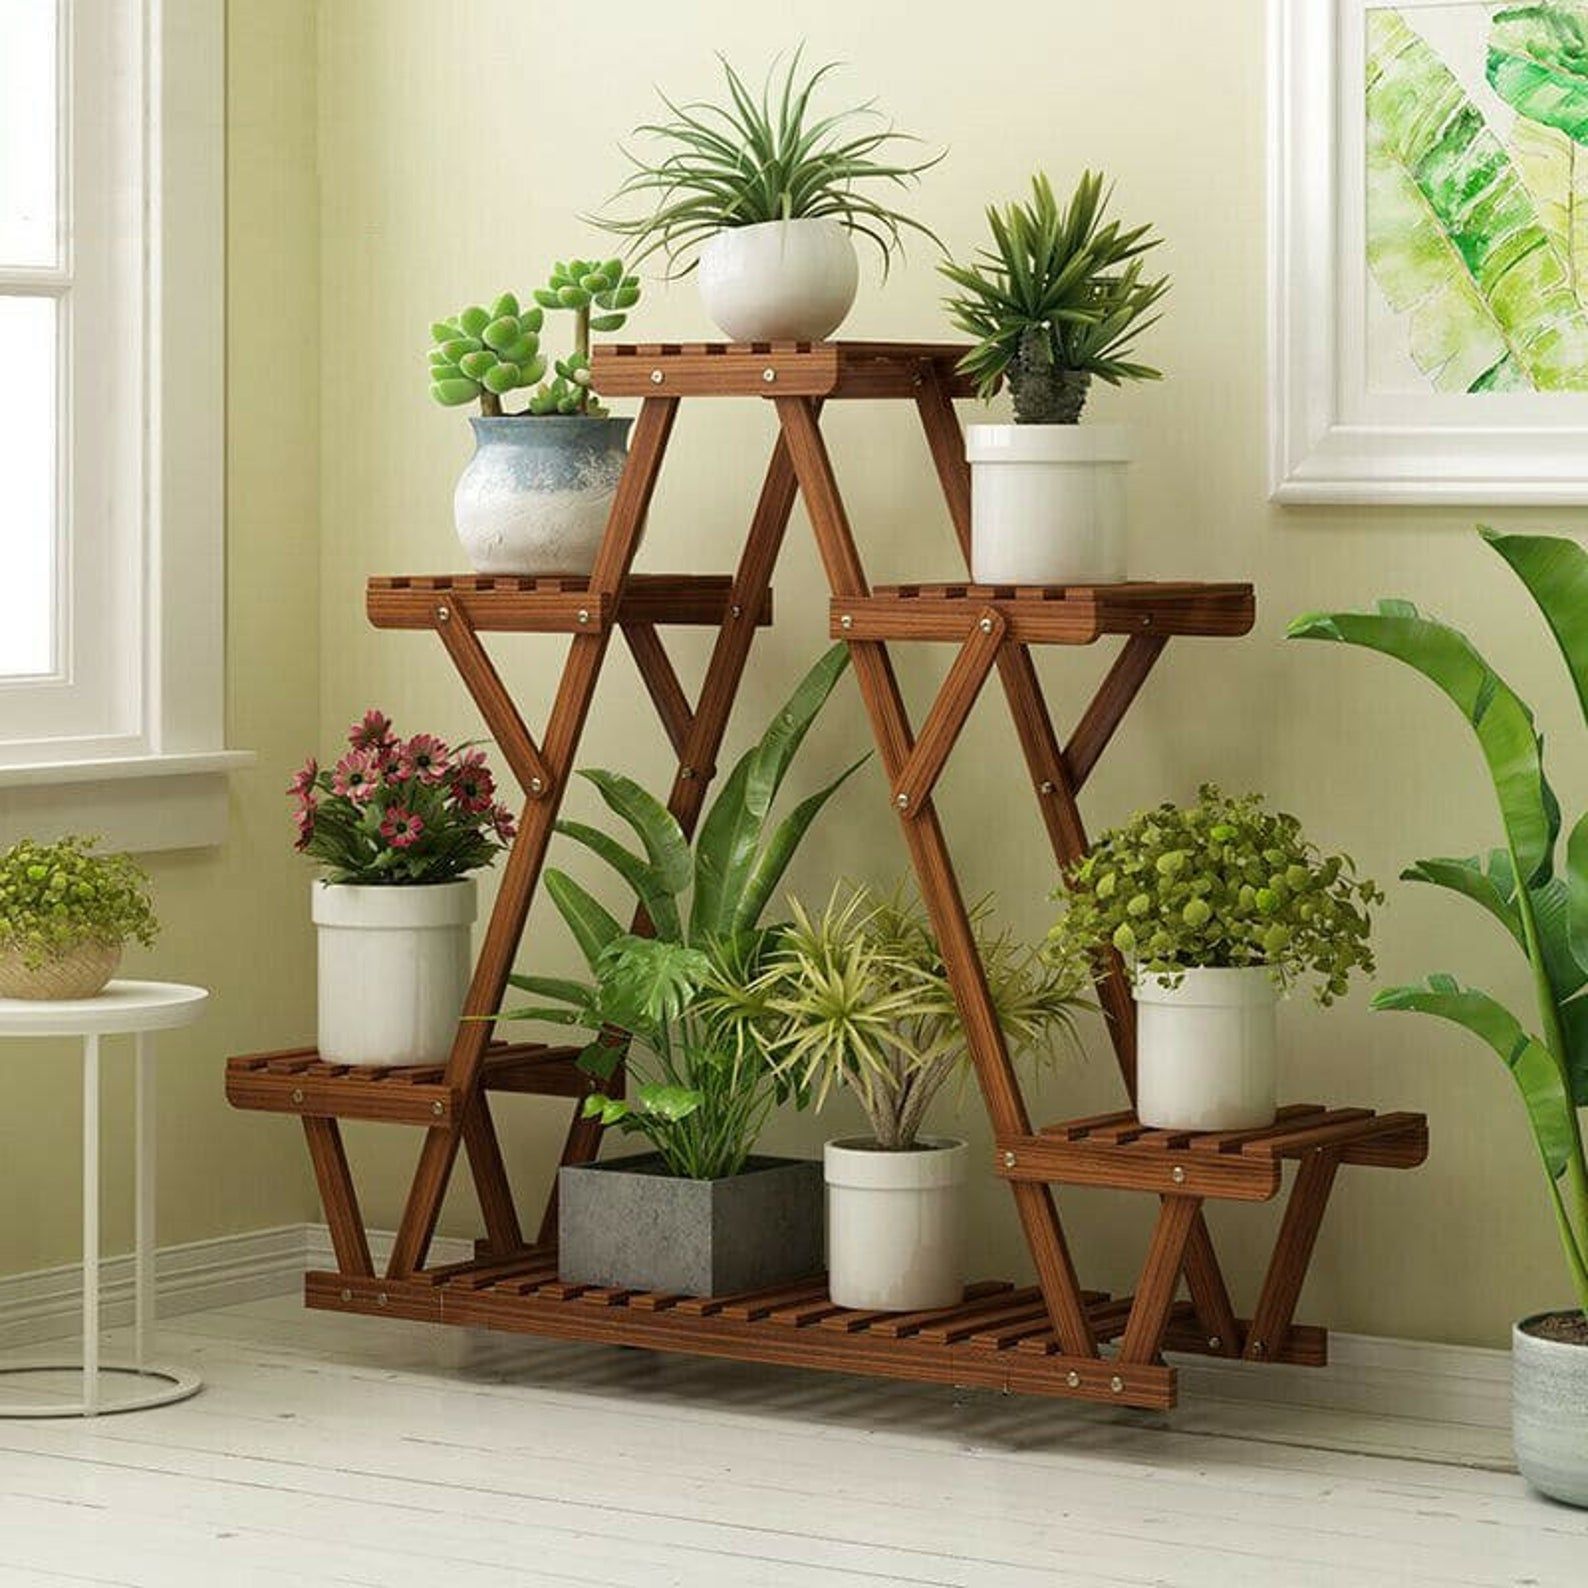 Wood Plant Stand Indoor Outdoor Carbonized Triangle 6 Tiered Corner Plant Rack -23inches -   19 diy Interieur plants ideas